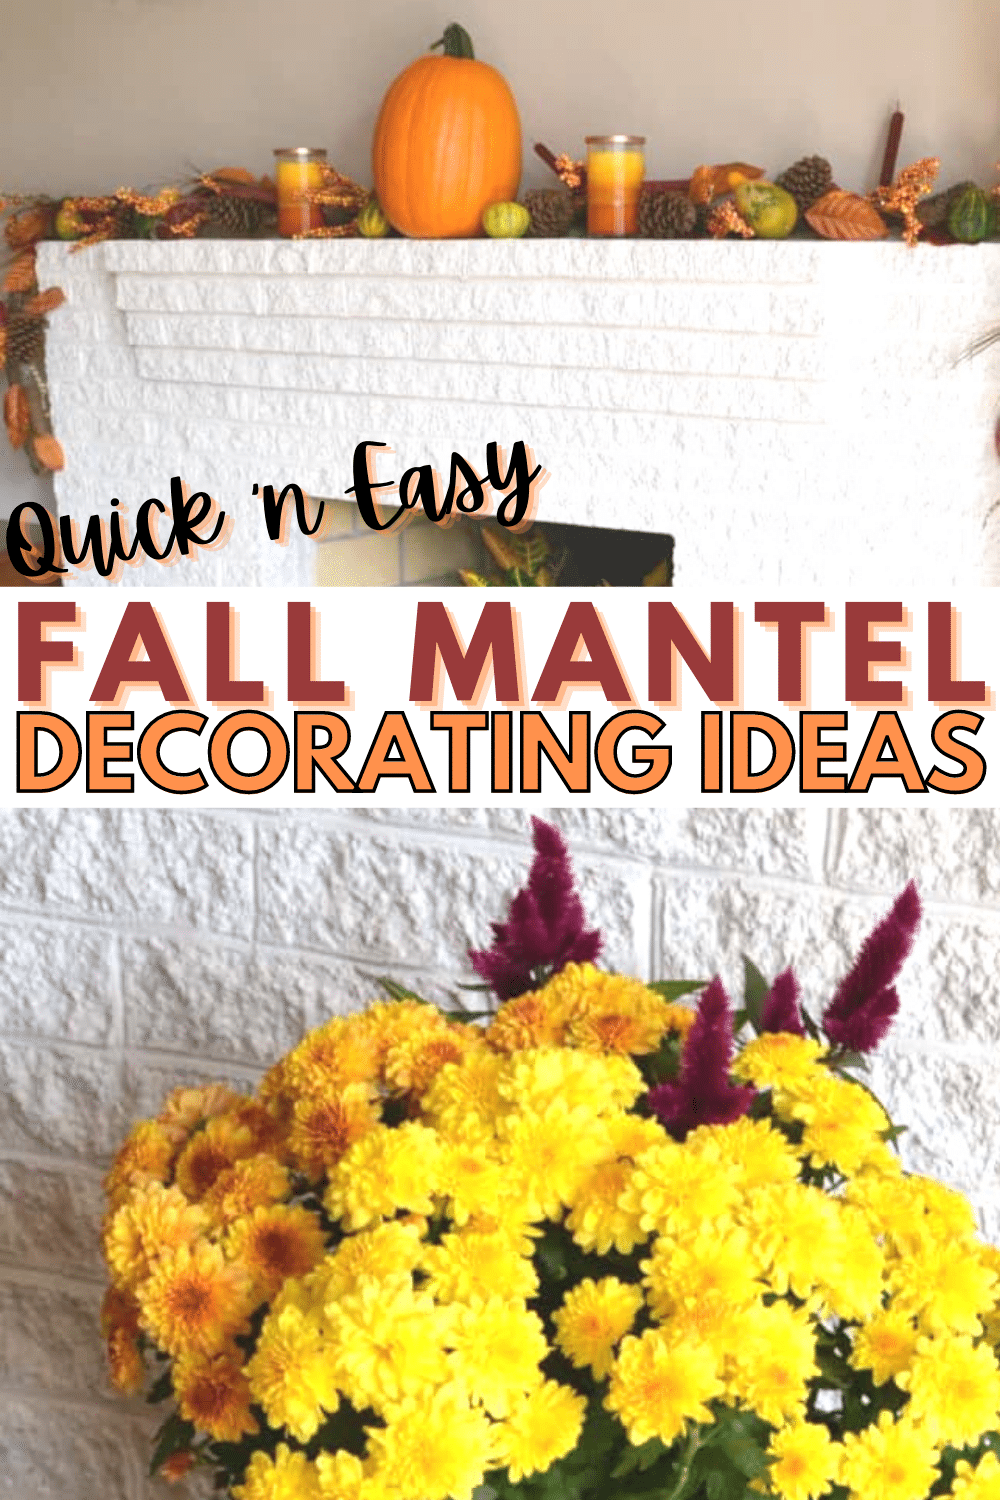 Transform the look of your home for autumn in a matter of minutes with these quick and easy fall mantel decorating ideas. #fall #decor #decorating #ideas via @wondermomwannab